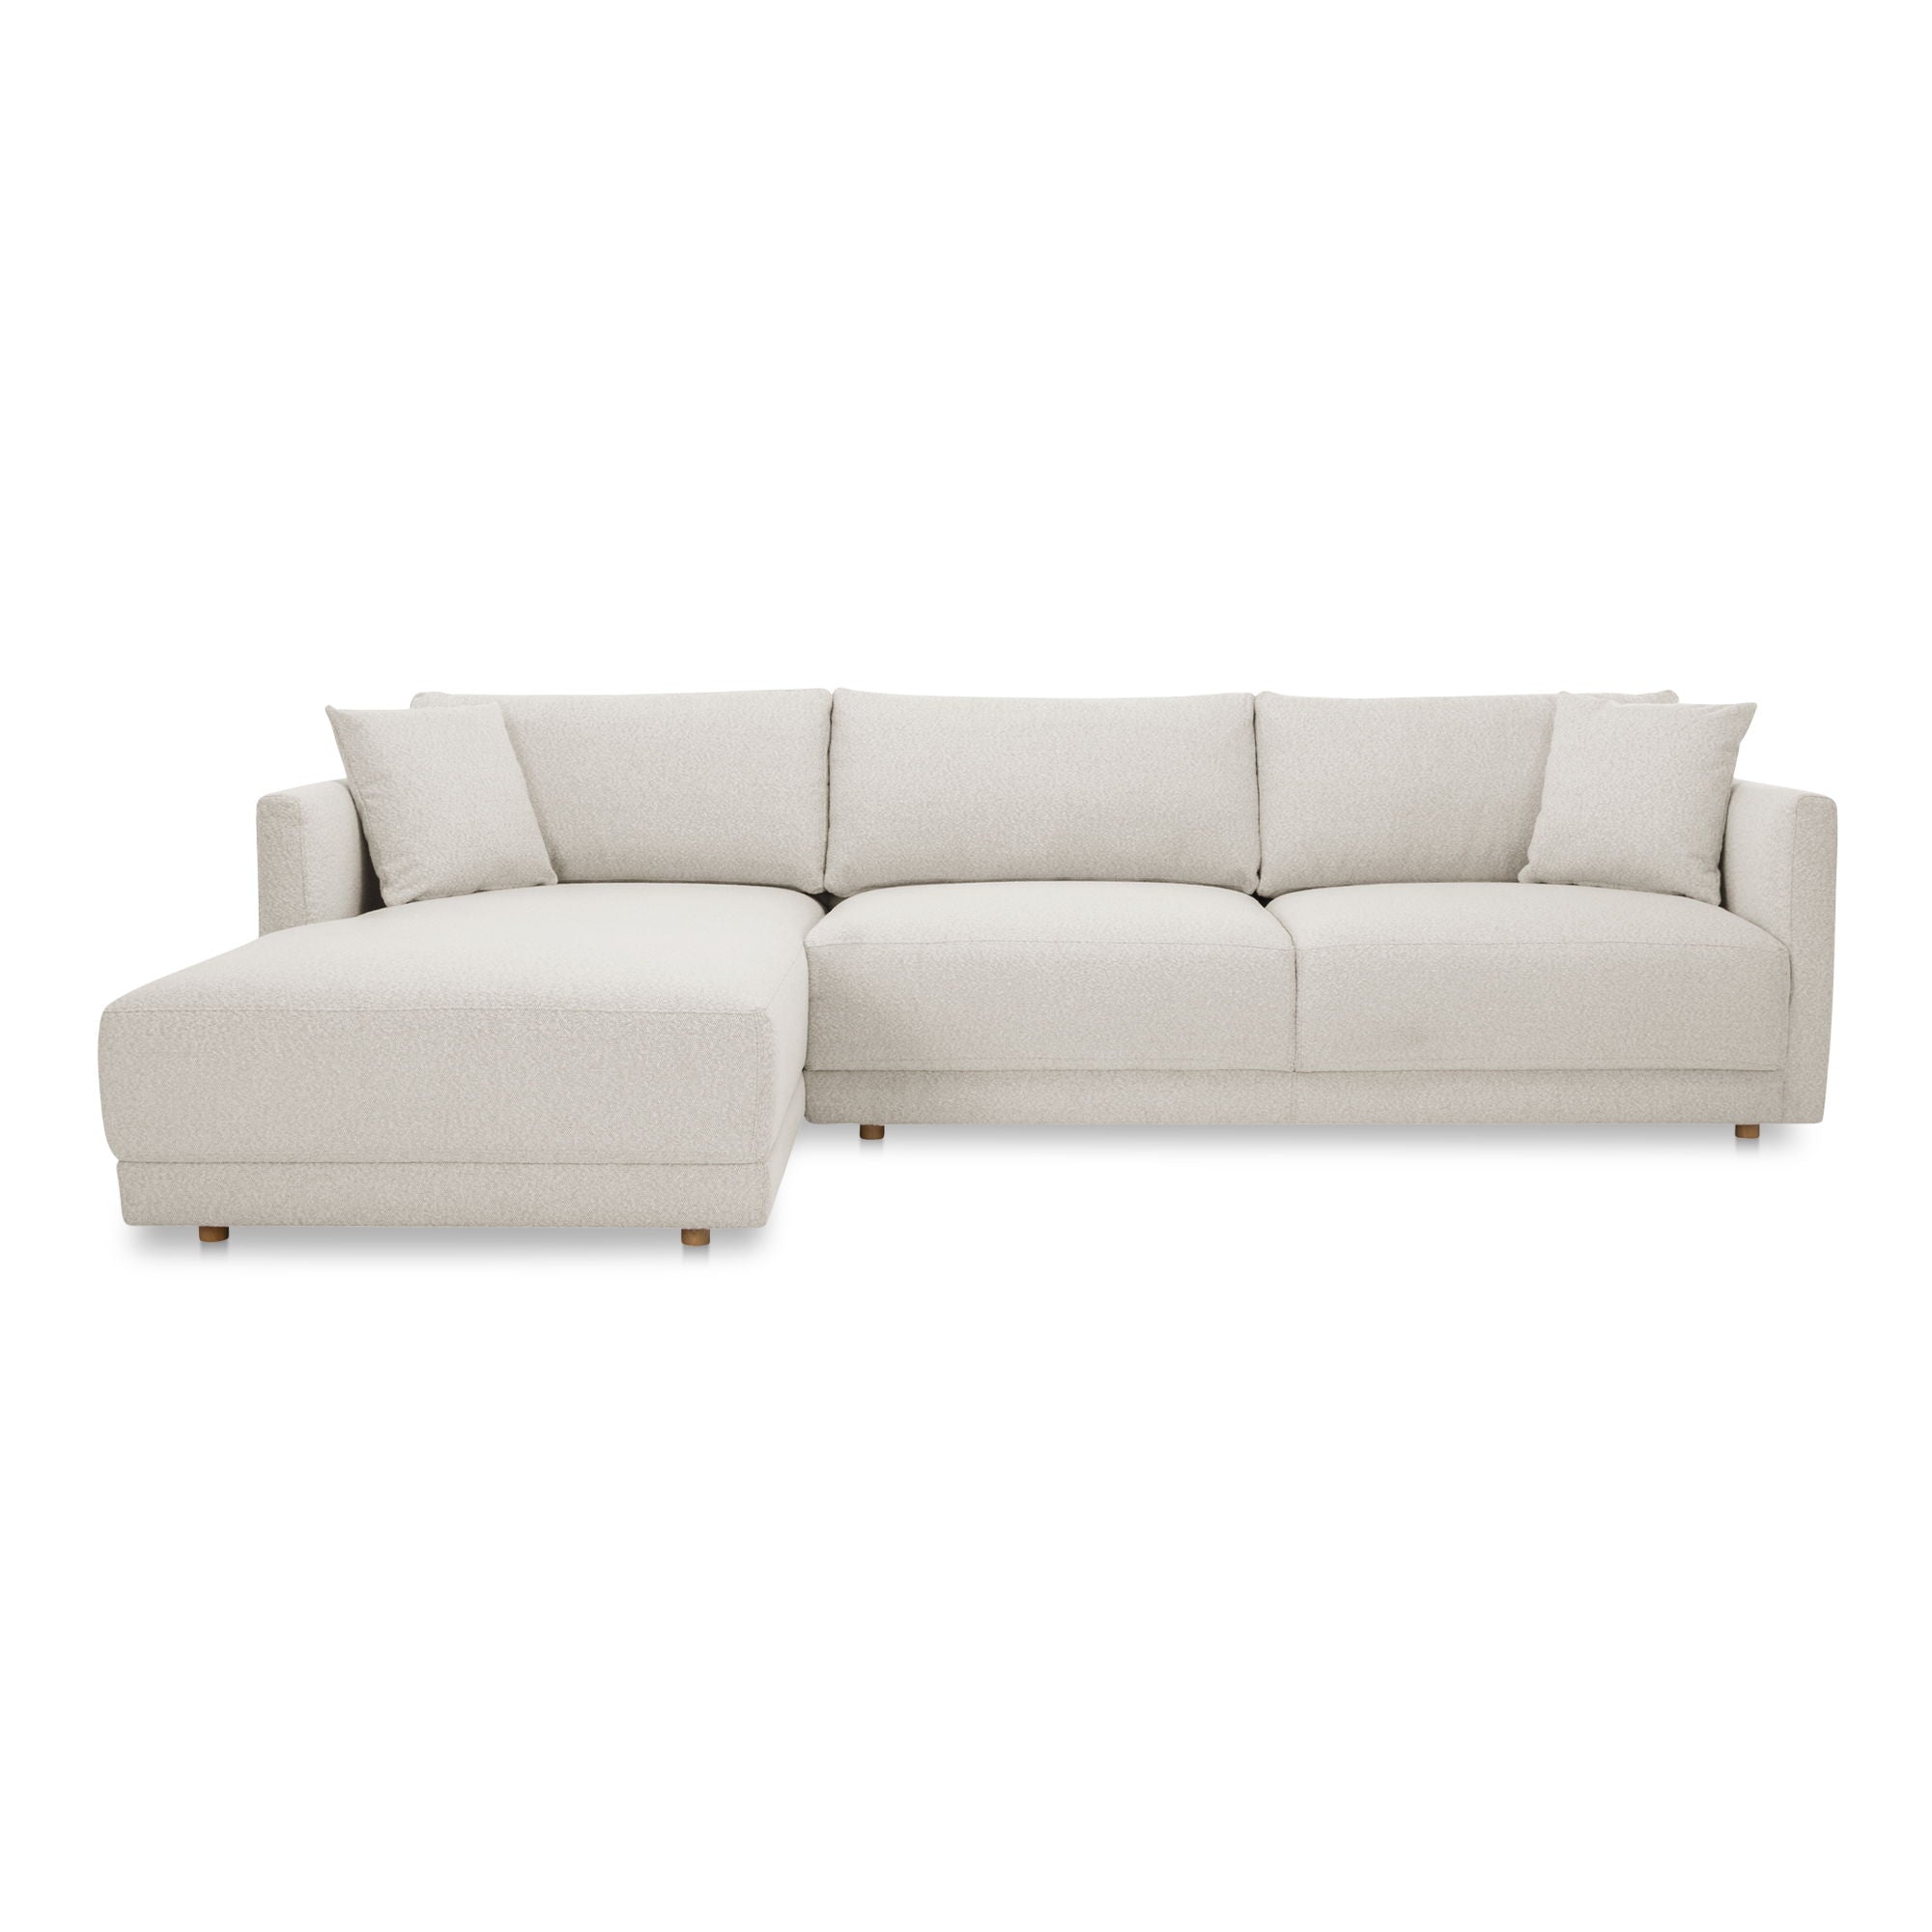 Bryn - Sectional Left - Oyster